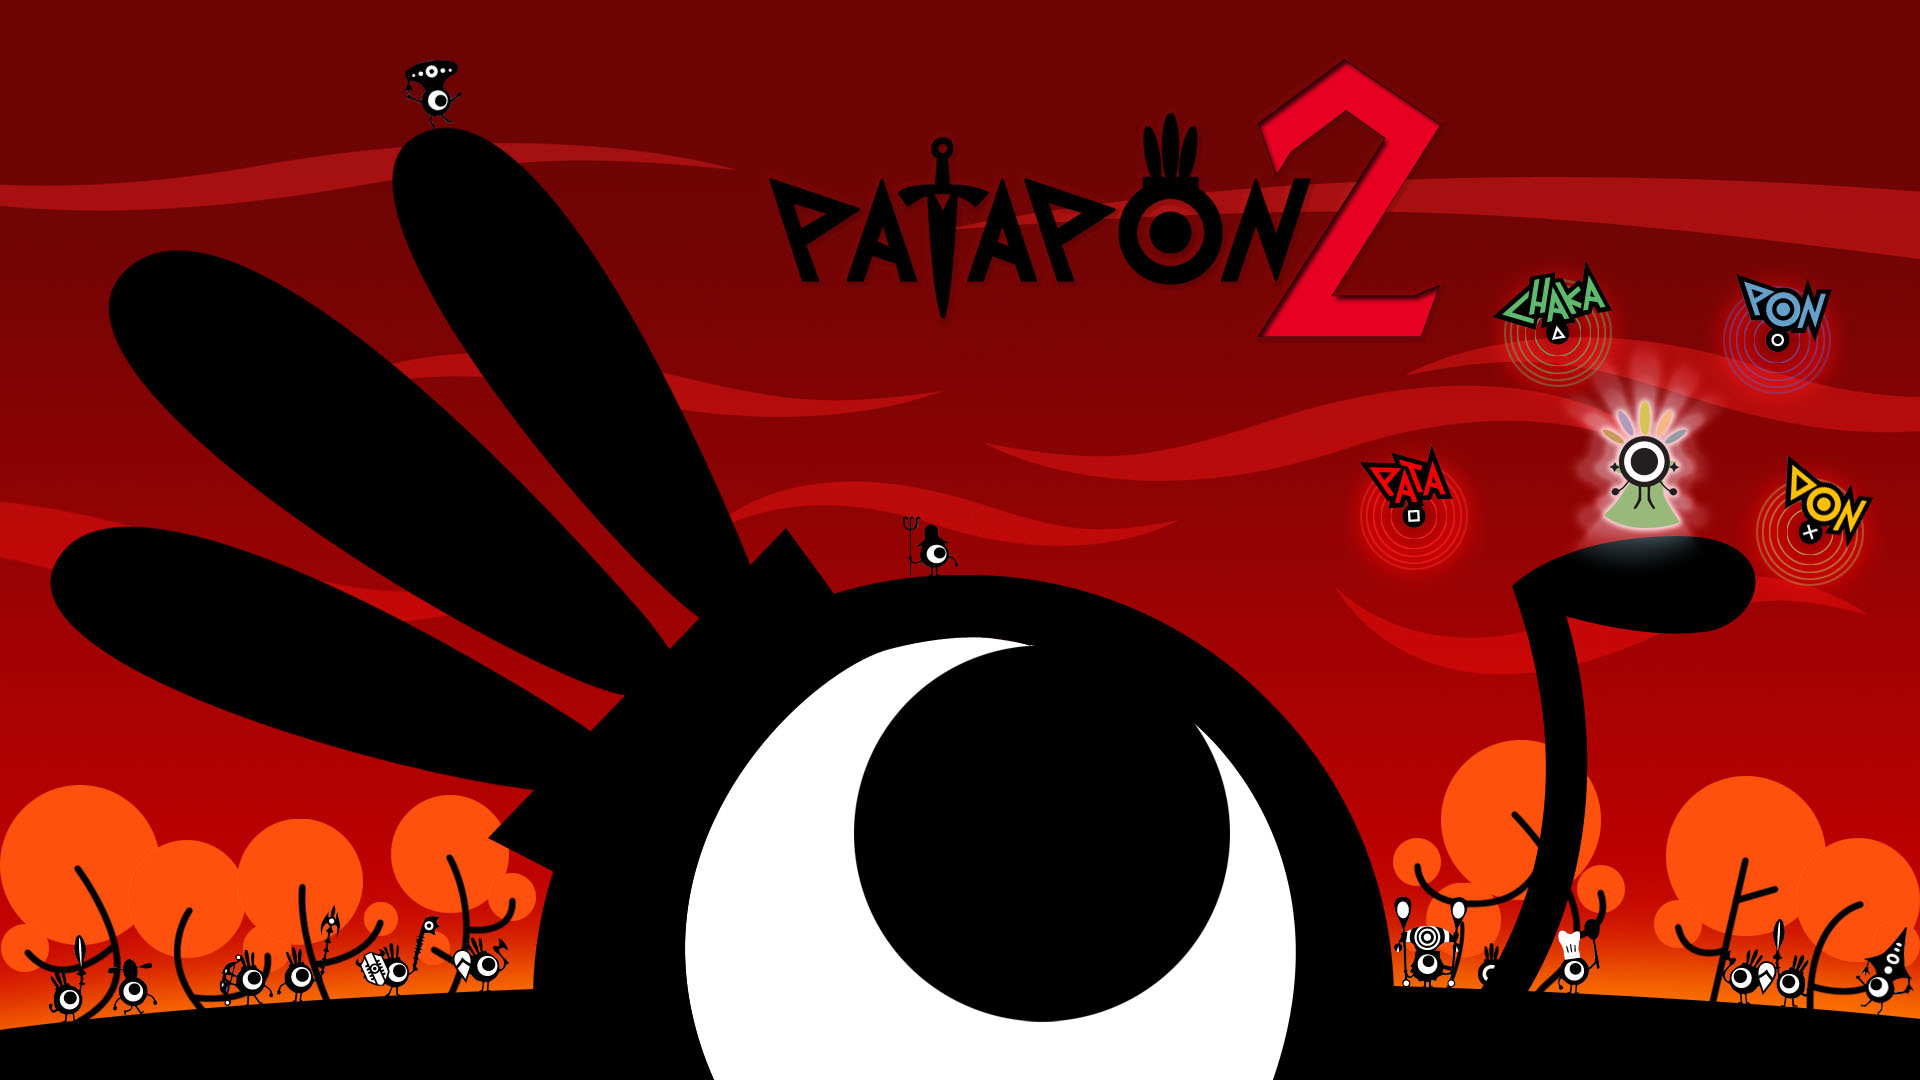 1920x1080 > Patapon 2 Wallpapers